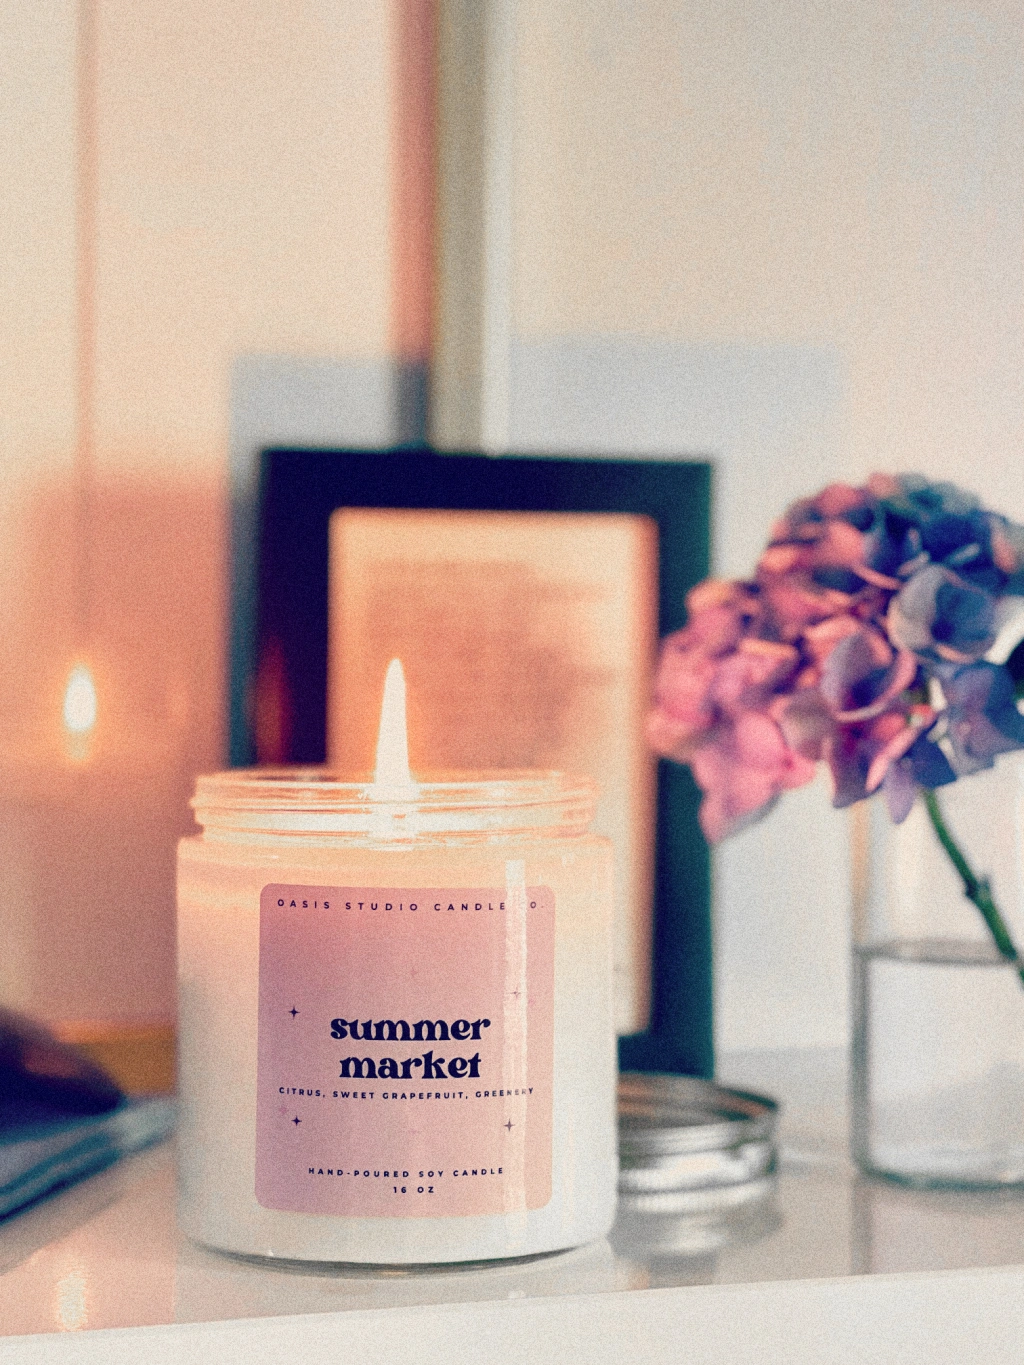 A monthly candle subscription box I often recommend